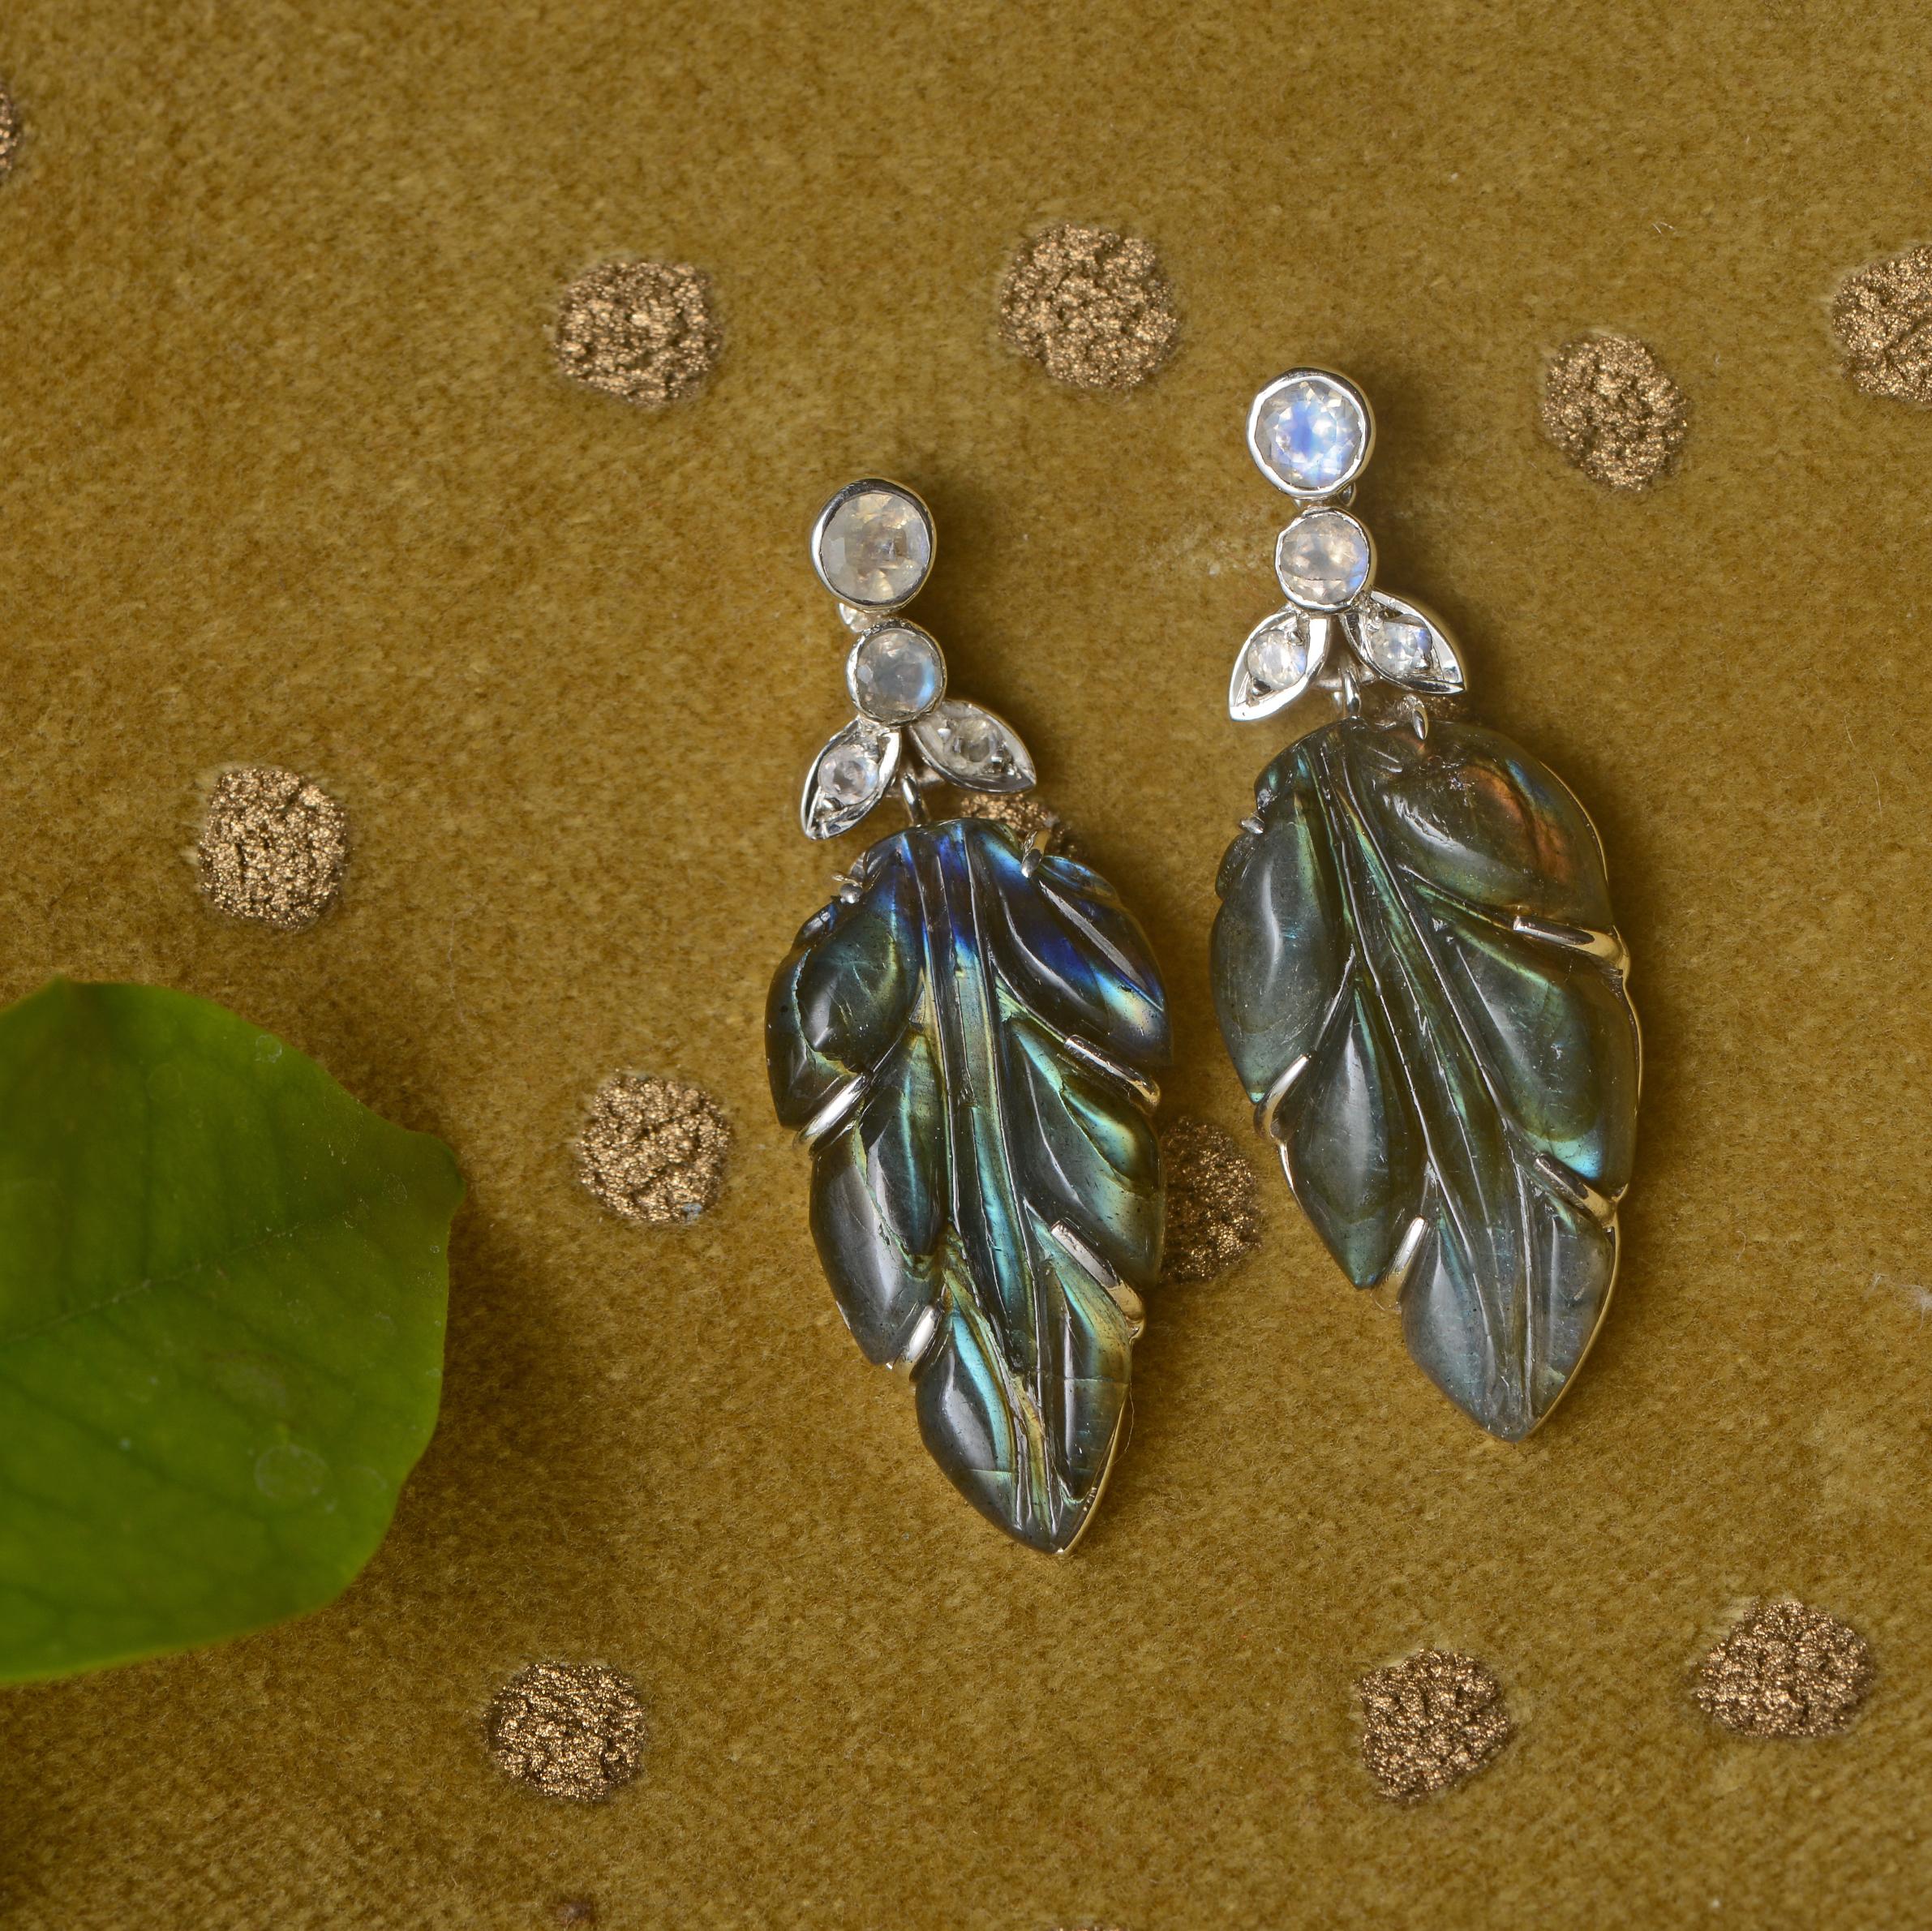 Using the ancient art of stone-carving, these stunning one-of-a-kind labradorite earrings have been hand-engraved and hand-carved into leaf patterns. The earrings which are made in sterling silver are embedded with rainbow moonstones at the top, and